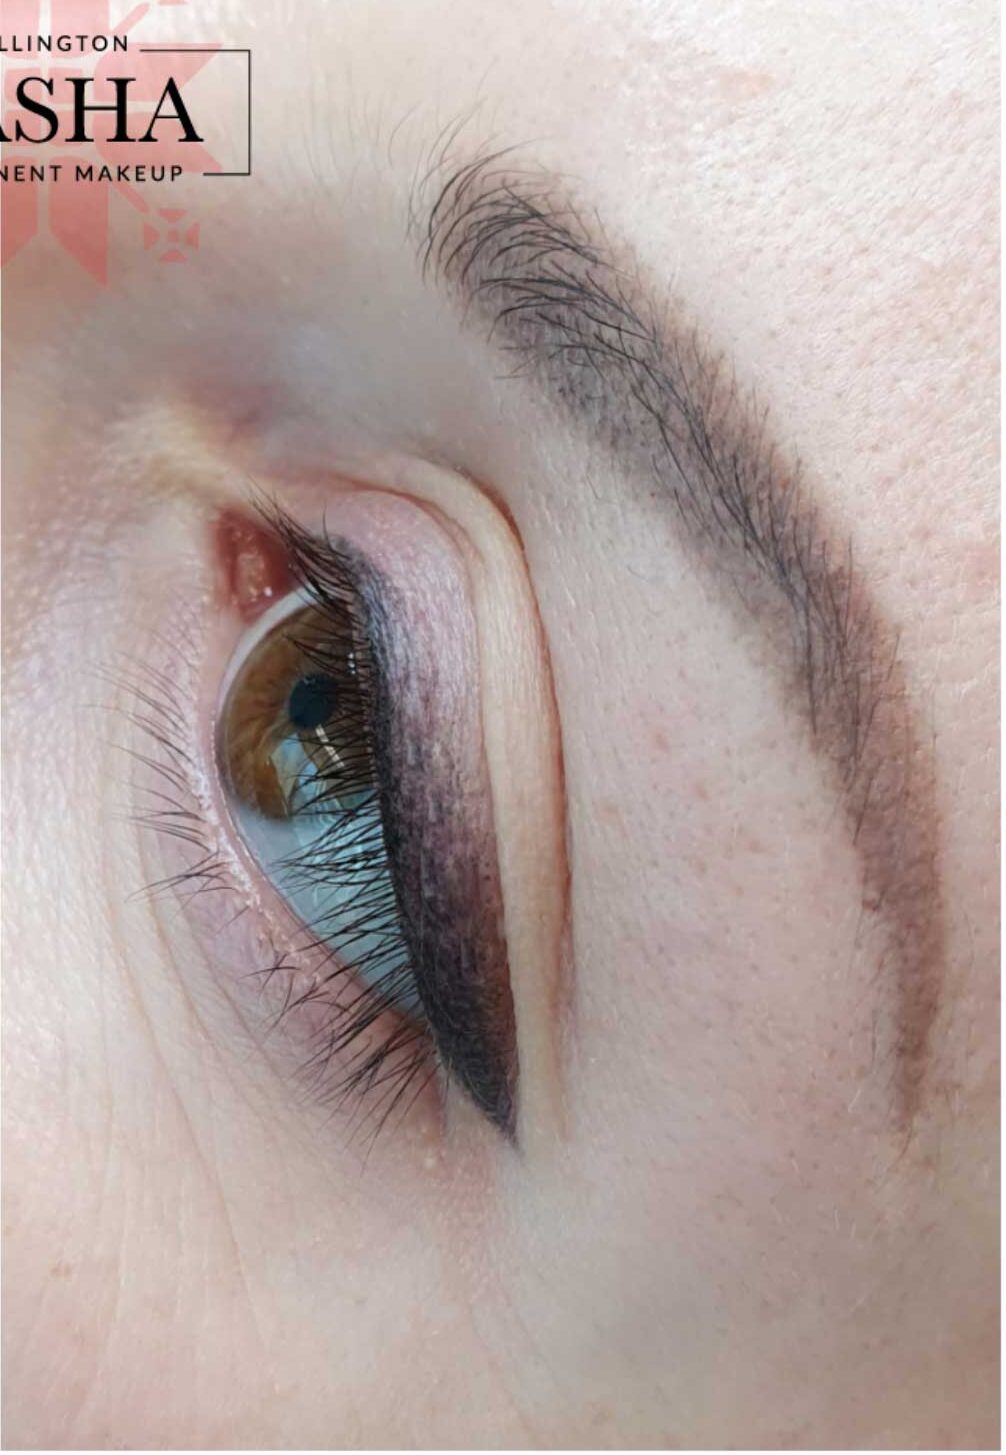 Eyeliner & Brows Cosmetic Tattoo. Cosmetic and Mediical Tattoo by Dasha. Permanent makeup and reconstructive tattoo, scalp micro-pigmentation in Christchurch, New Zealand